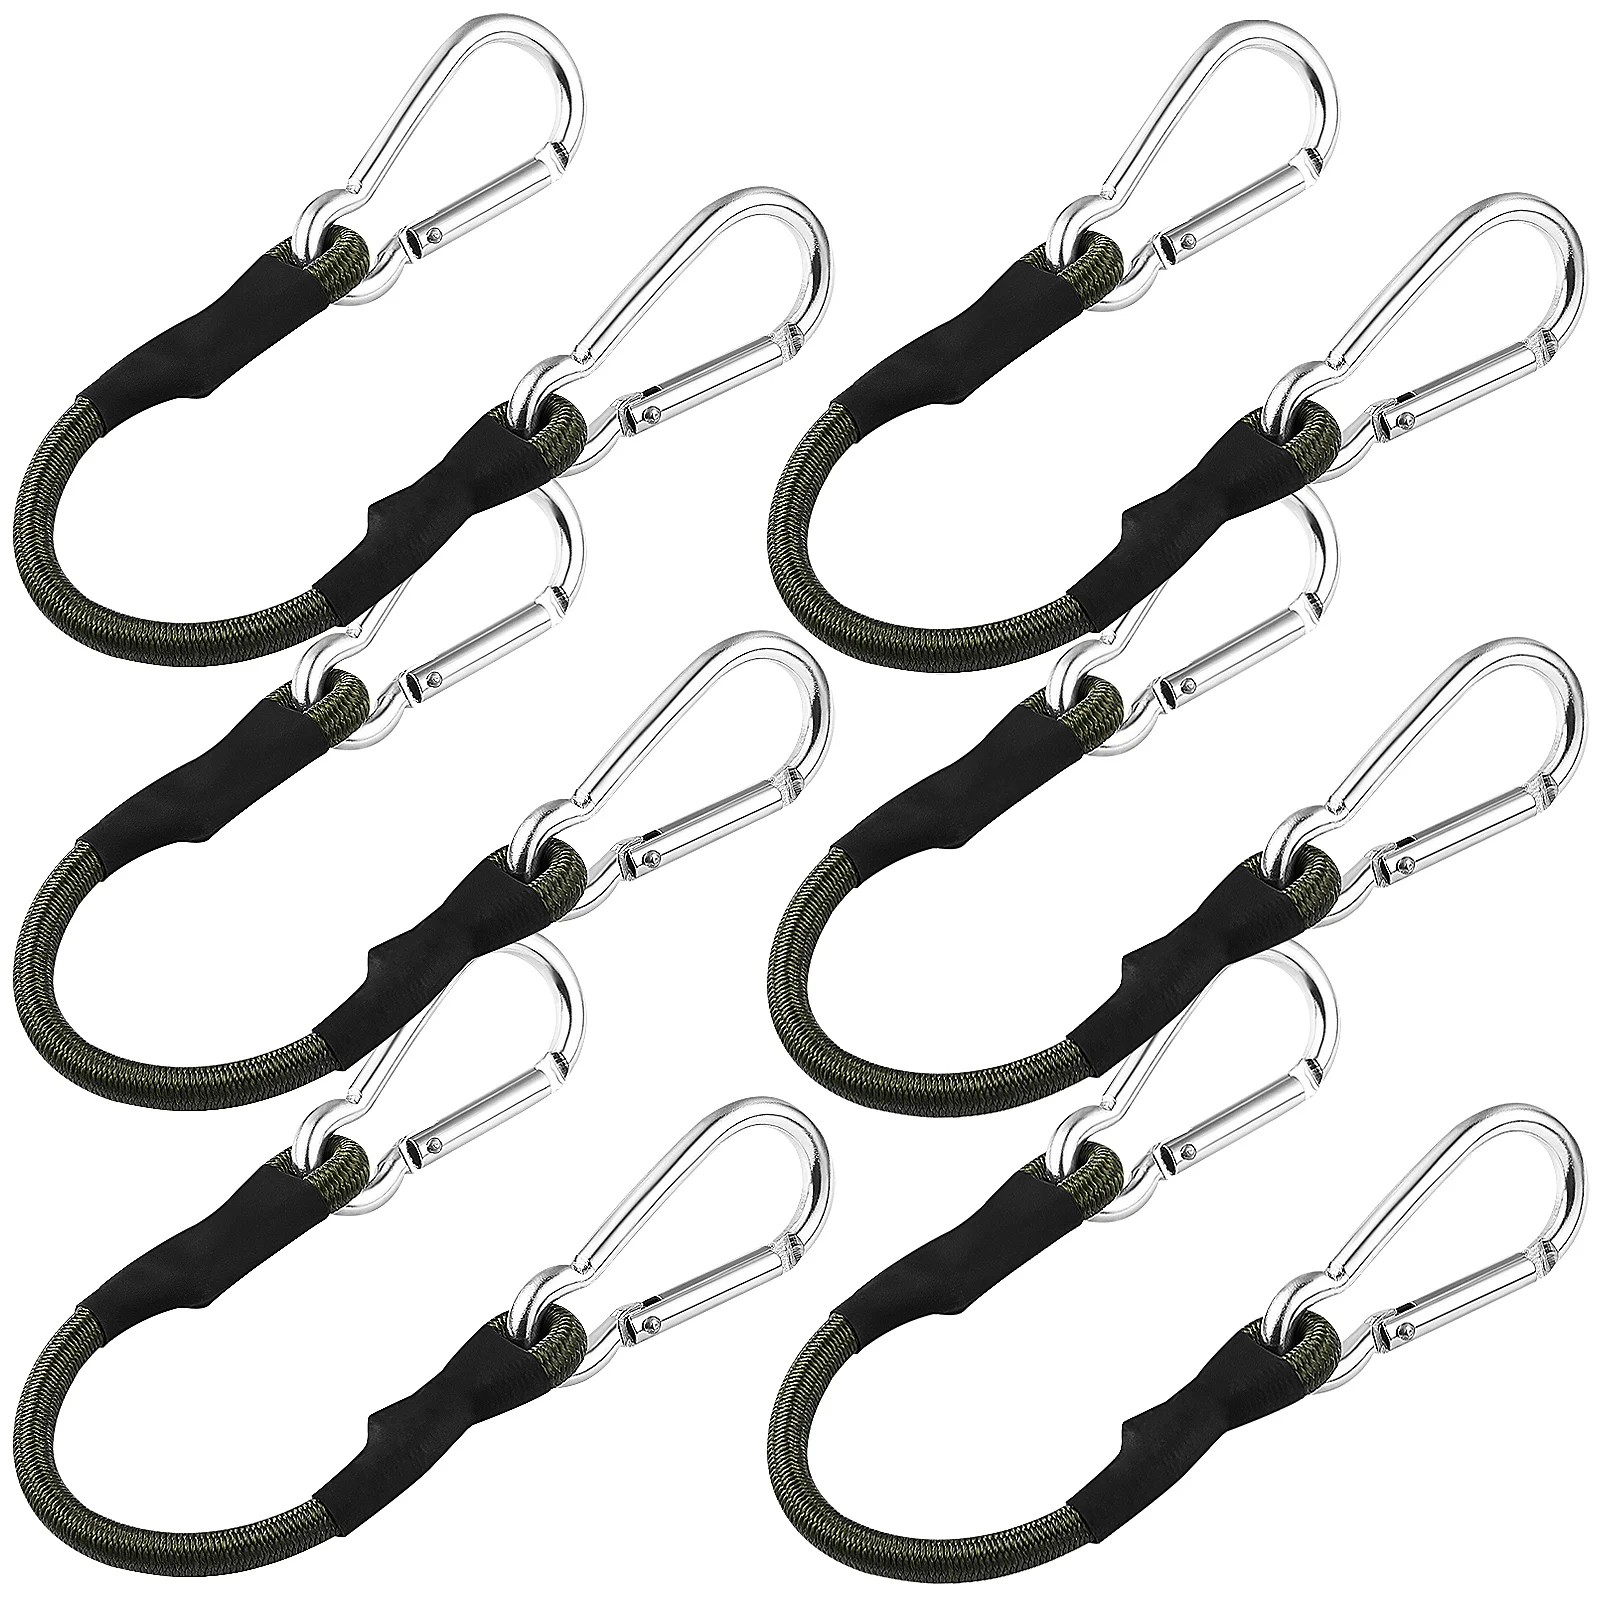 

6 Pcs Elastic Rope Tent Fixing Ropes Camping Straps Clothesline Outdoor Bungee Cords Carabiner Hooks Packing Canopy Luggage